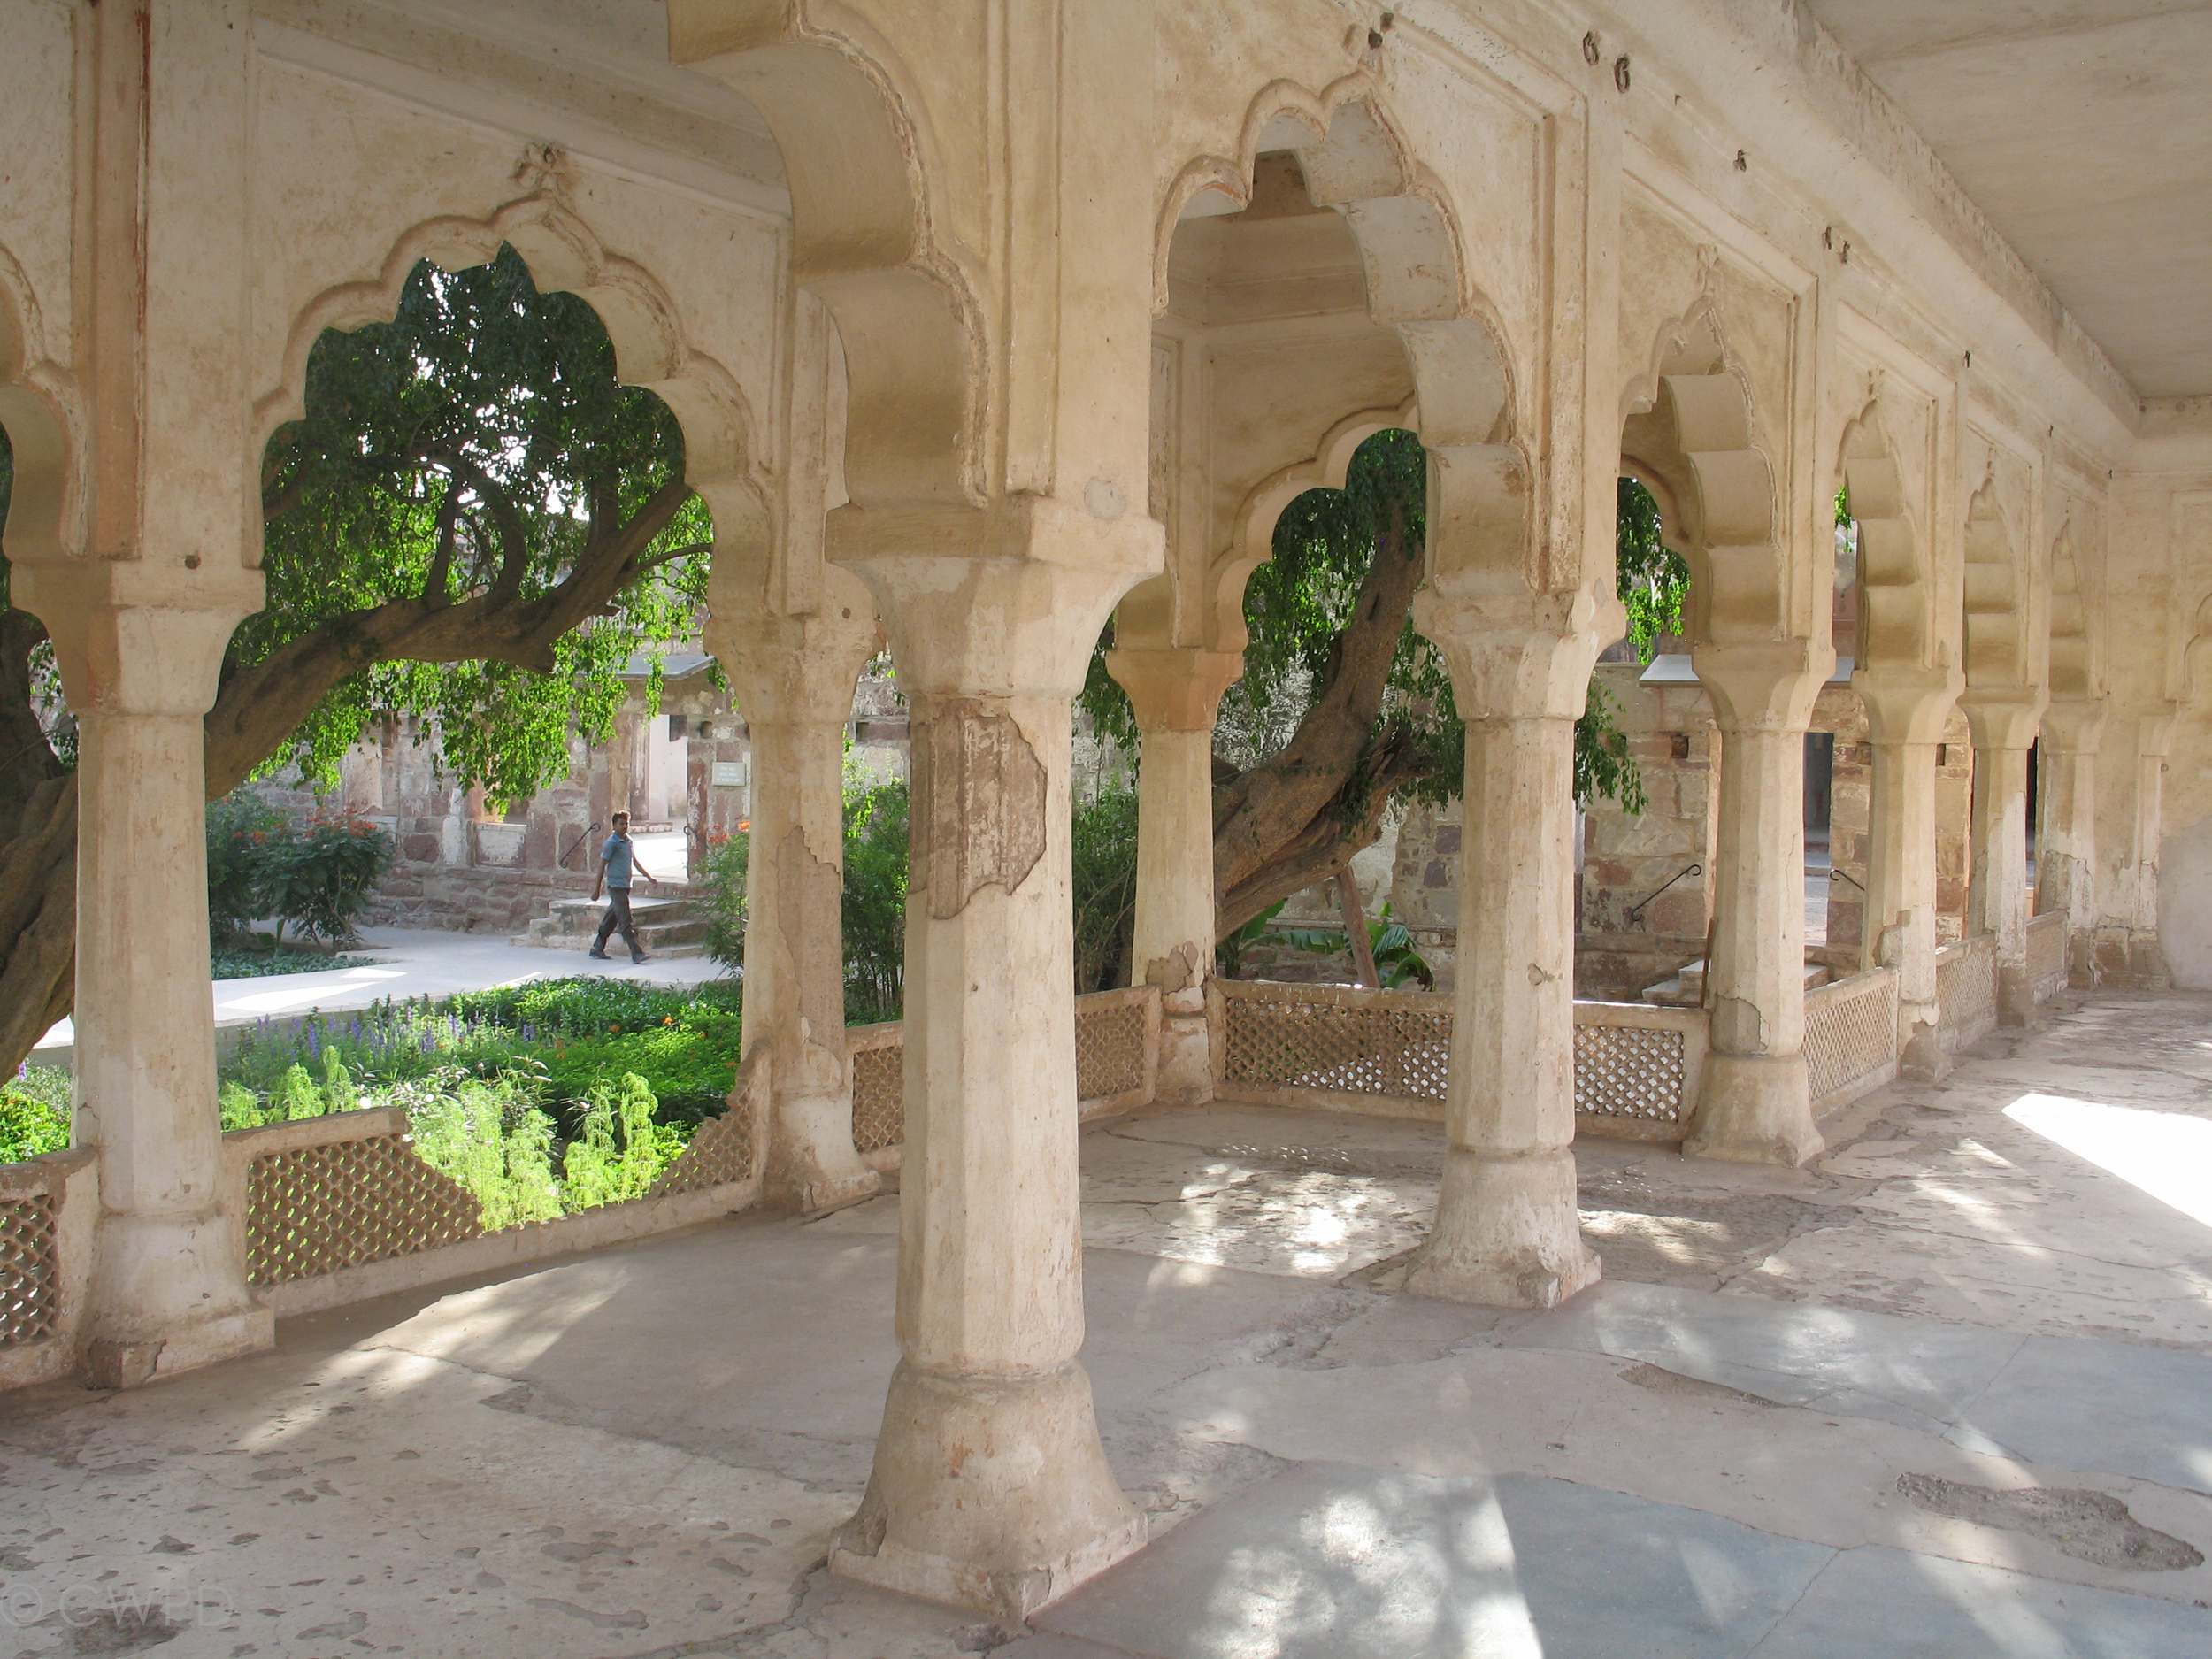  Arcaded walkway though which lies the Sheesh Mahal building and garden.&nbsp;  Image © Courtauld CWPD 